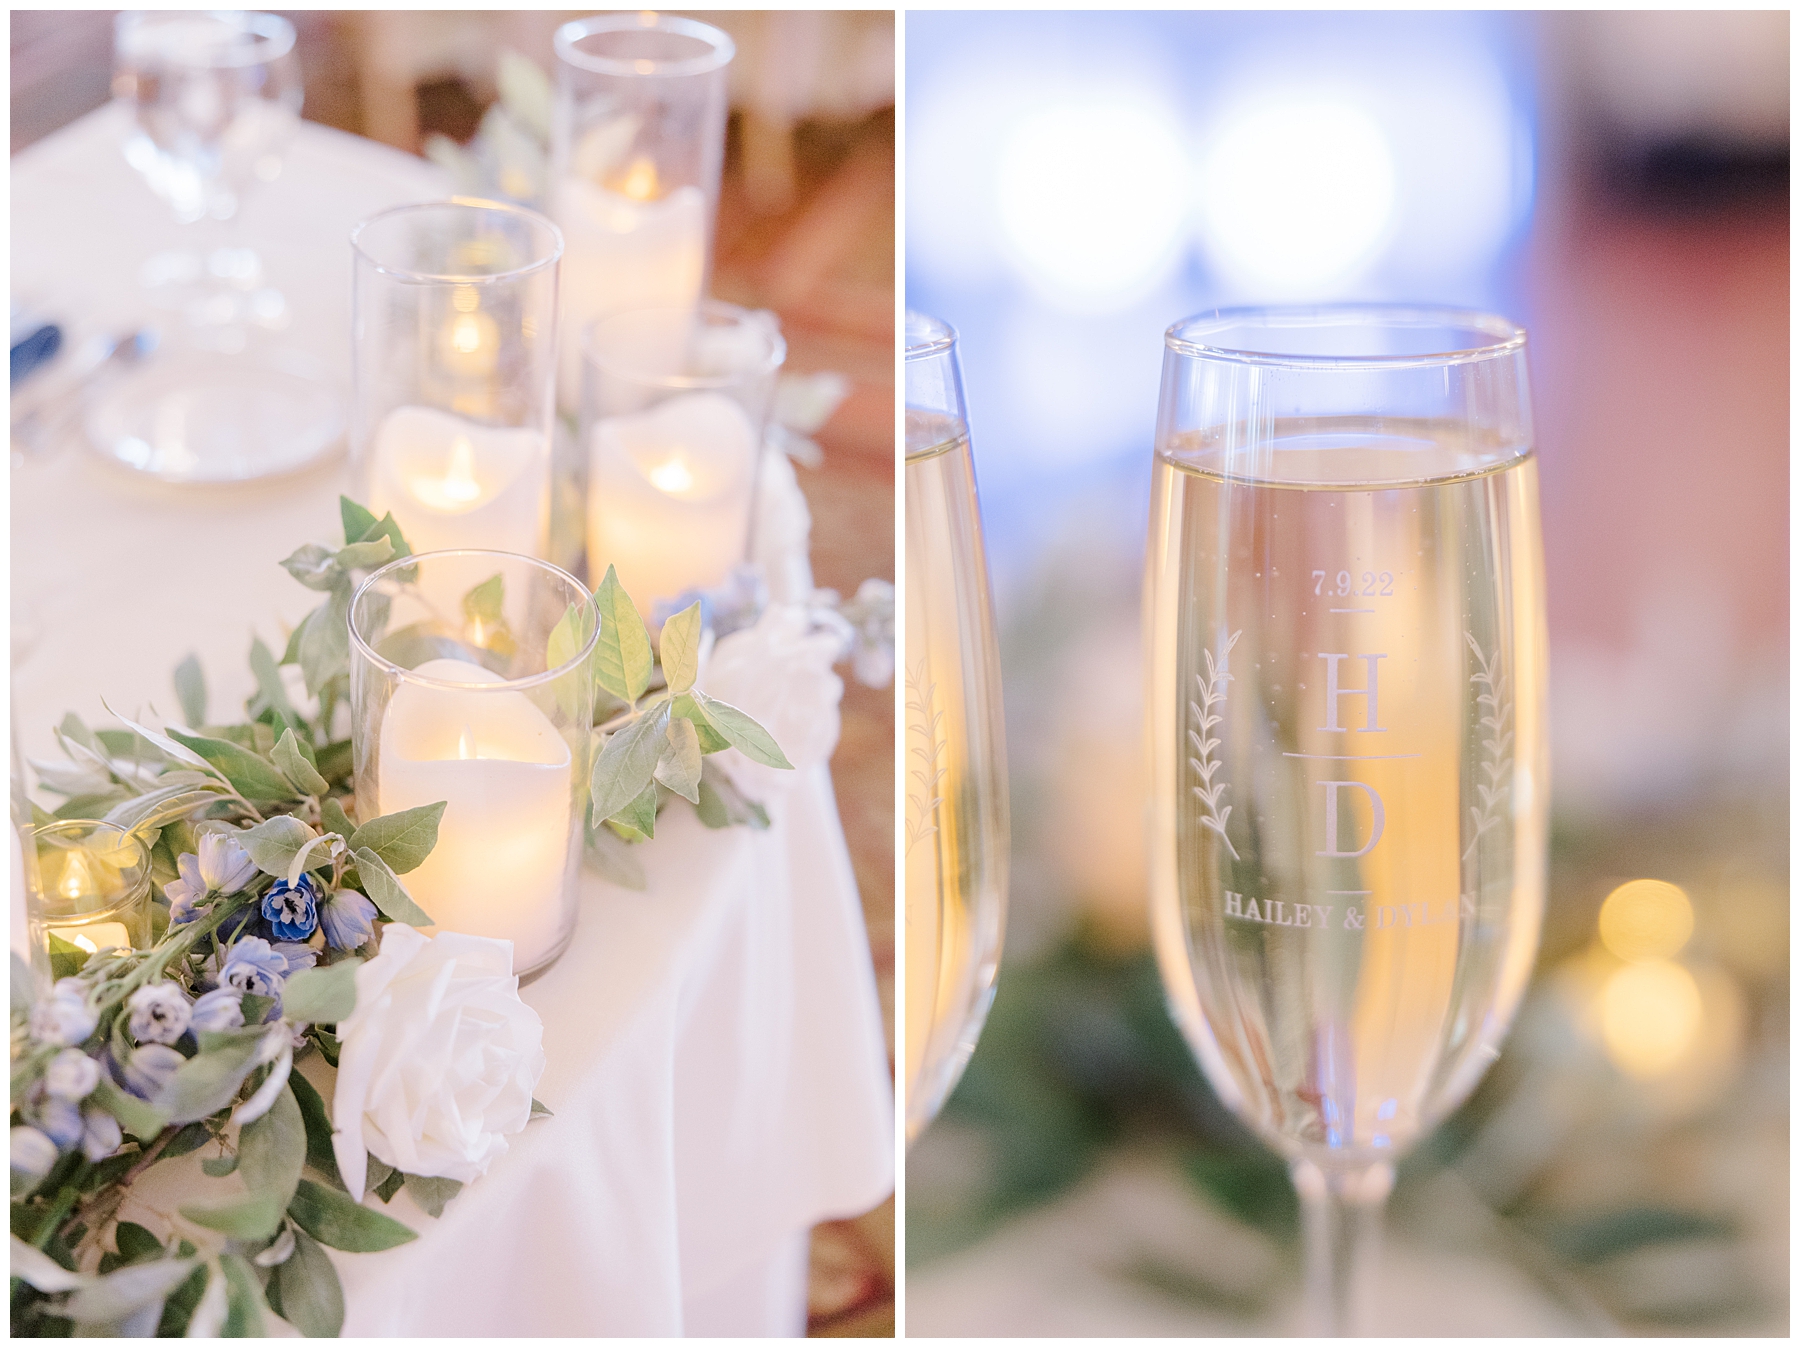 champagne glasses and candles at wedding reception